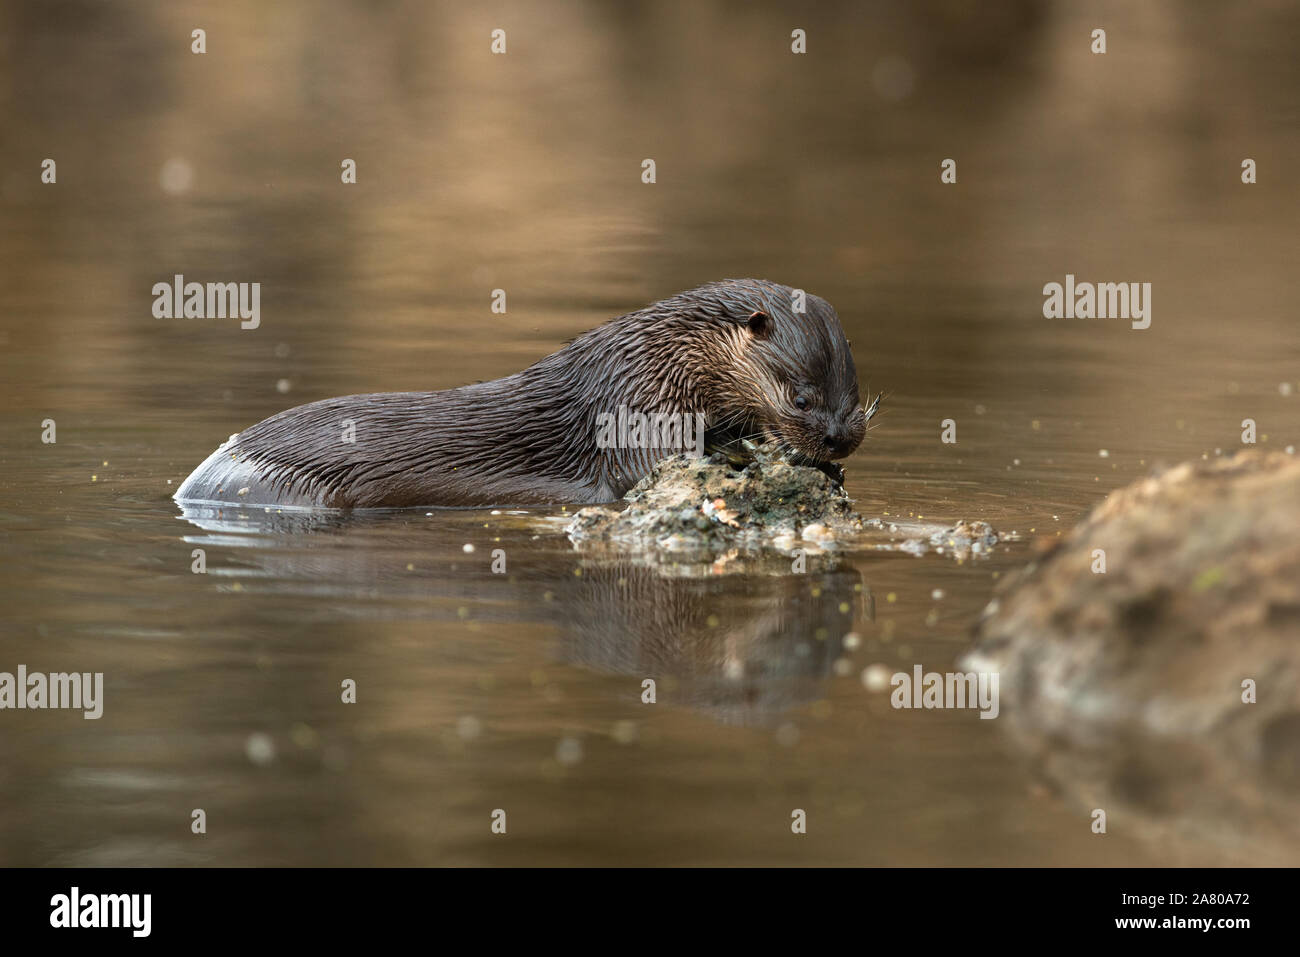 A Neotropical Otter (Lontra longicaudis) feeding on a fish in South Pantanal Stock Photo